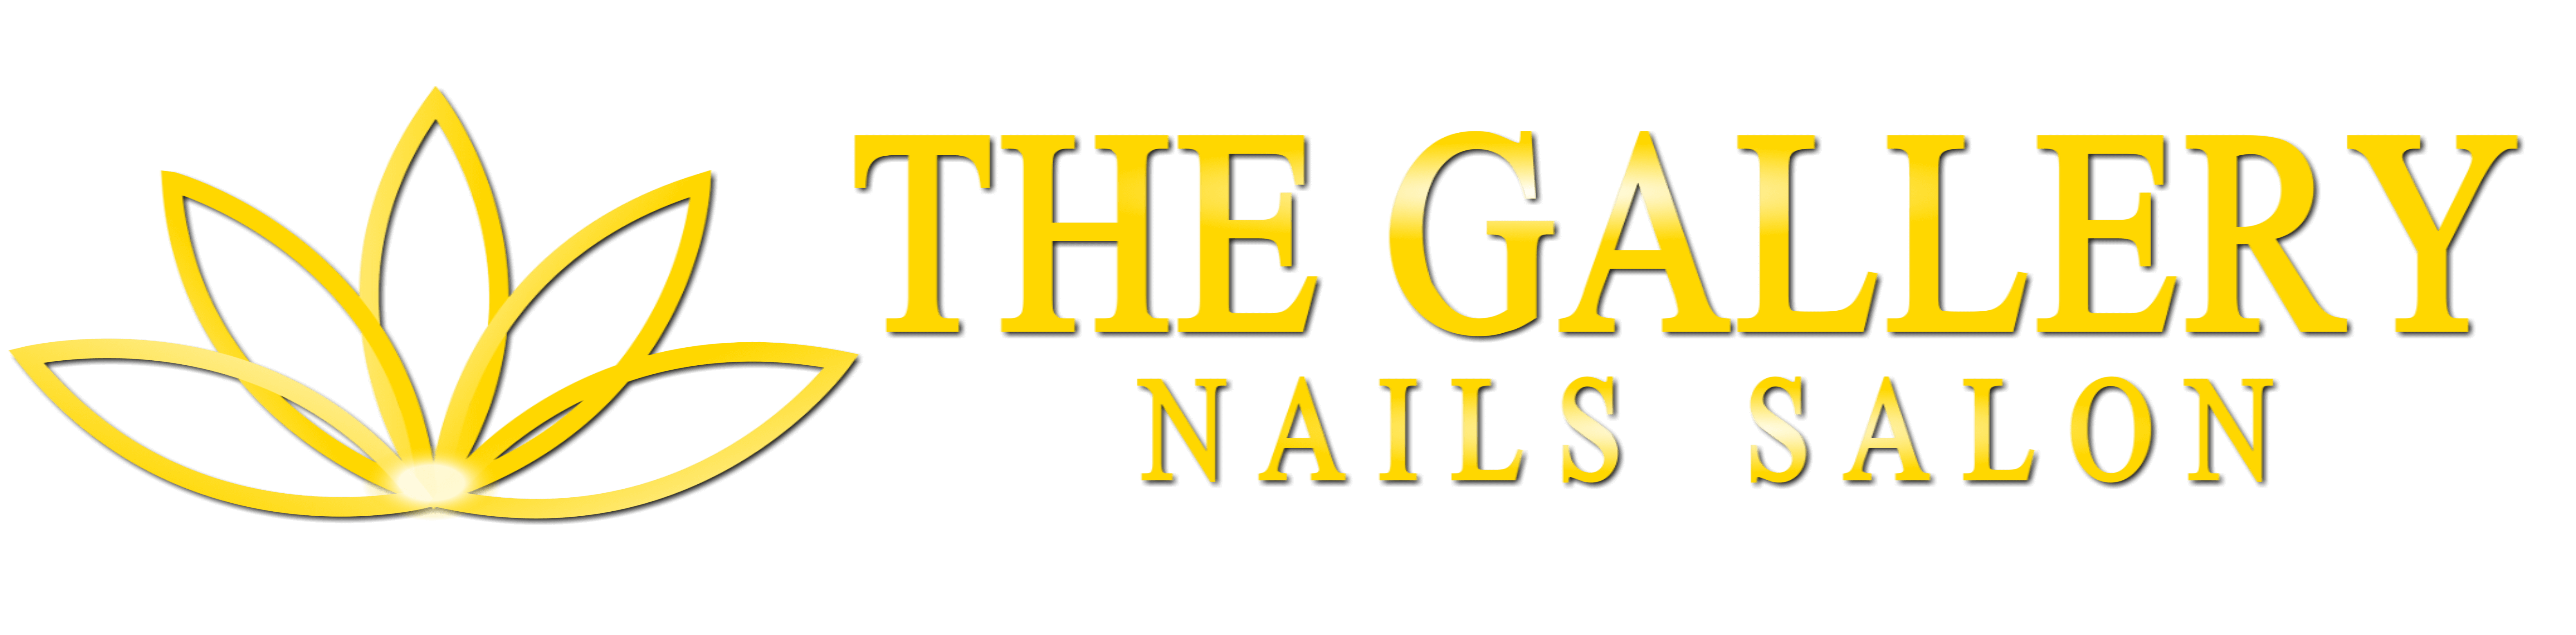 THE GALLERY NAILS SALON